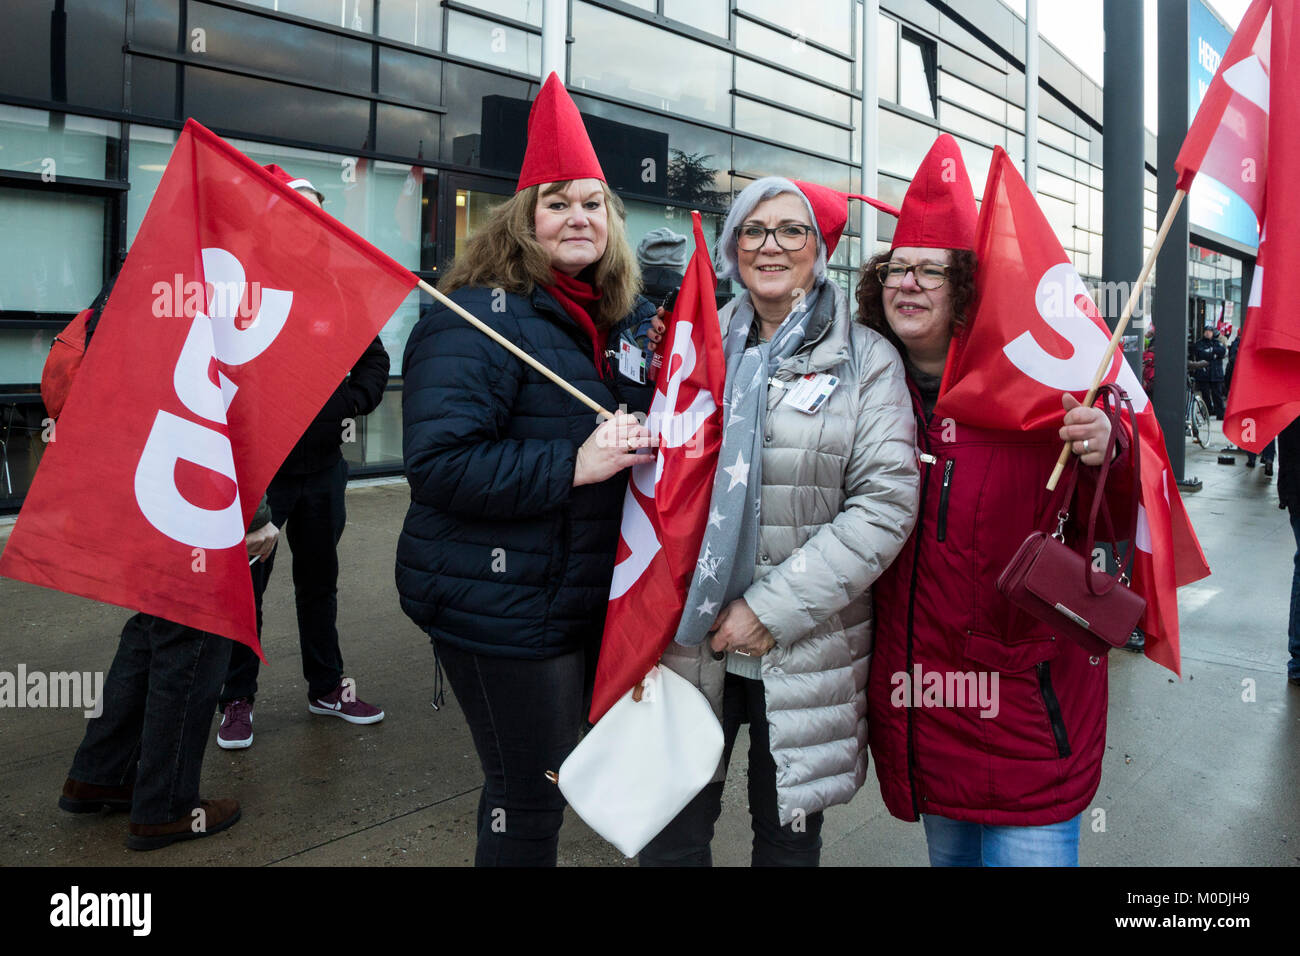 Bonn, Germany. 21 January 2018. Party members outside the convention centre protesting against a possible grand coalition. SPD extraordinary party convention at World Conference Center Bonn to discuss and approve options to enter into a grand coalition with Angela Merkel's CDU, Christian Democrats, before asking SPD members for approval. Stock Photo